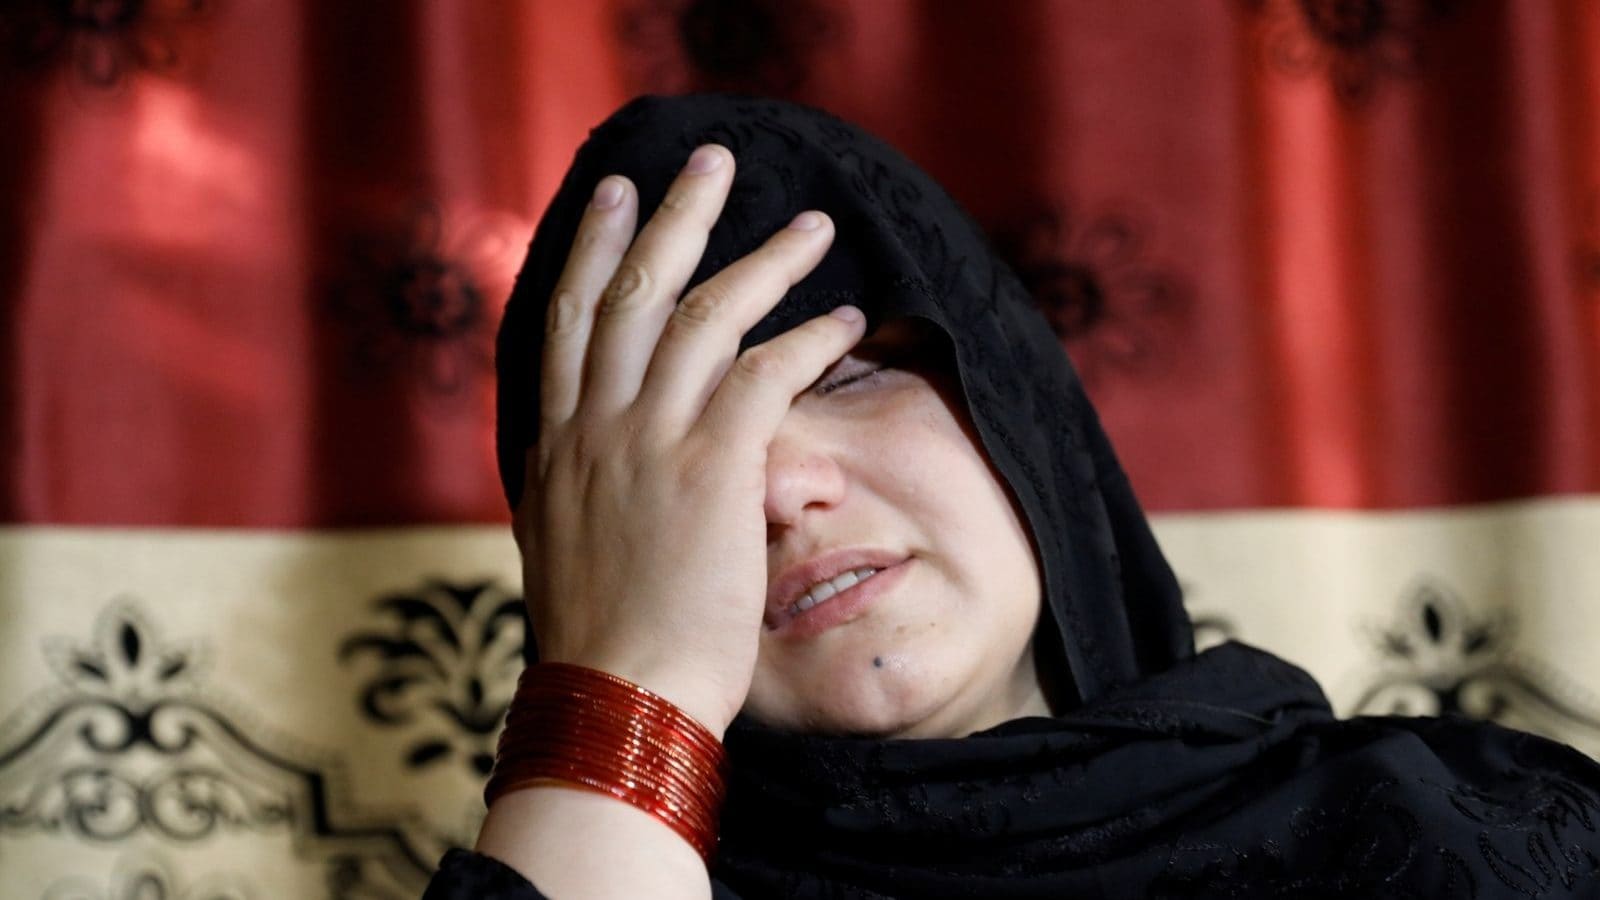 1600px x 900px - Stoning for Adultery, Execution for Tight Clothes: Taliban's Medieval  Gender Rules for Afghan Women